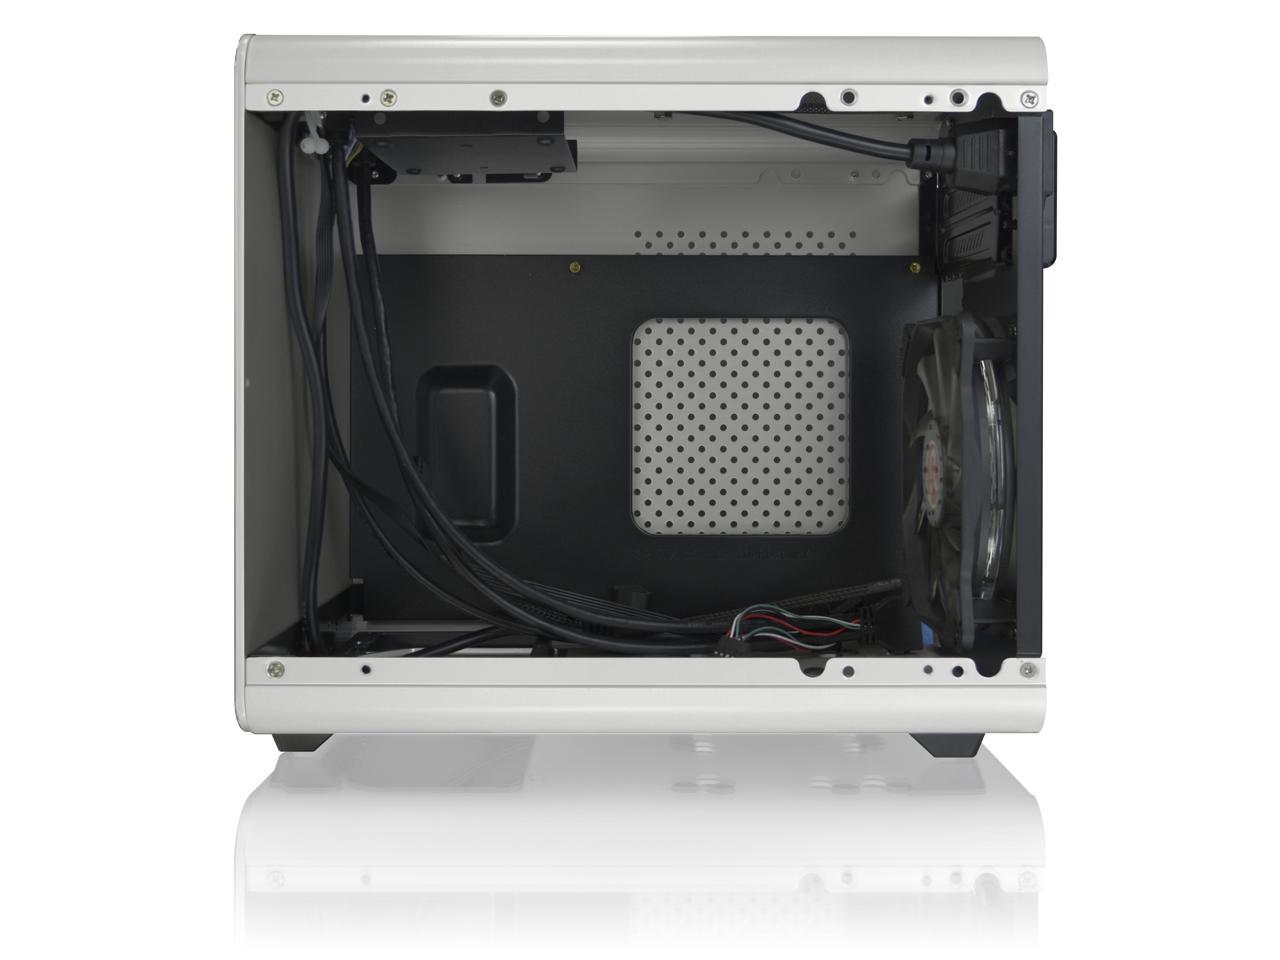 RAIJINTEK METIS PLUS WHITE, a Alu. M-ITX Case, is with one 12025 LED fan at rear, USB 3.0* 2, Ventilate holes at top, Compatible with Standard ATX PSU, 170mm VGA Card length, 160mm CPU Cooler height.